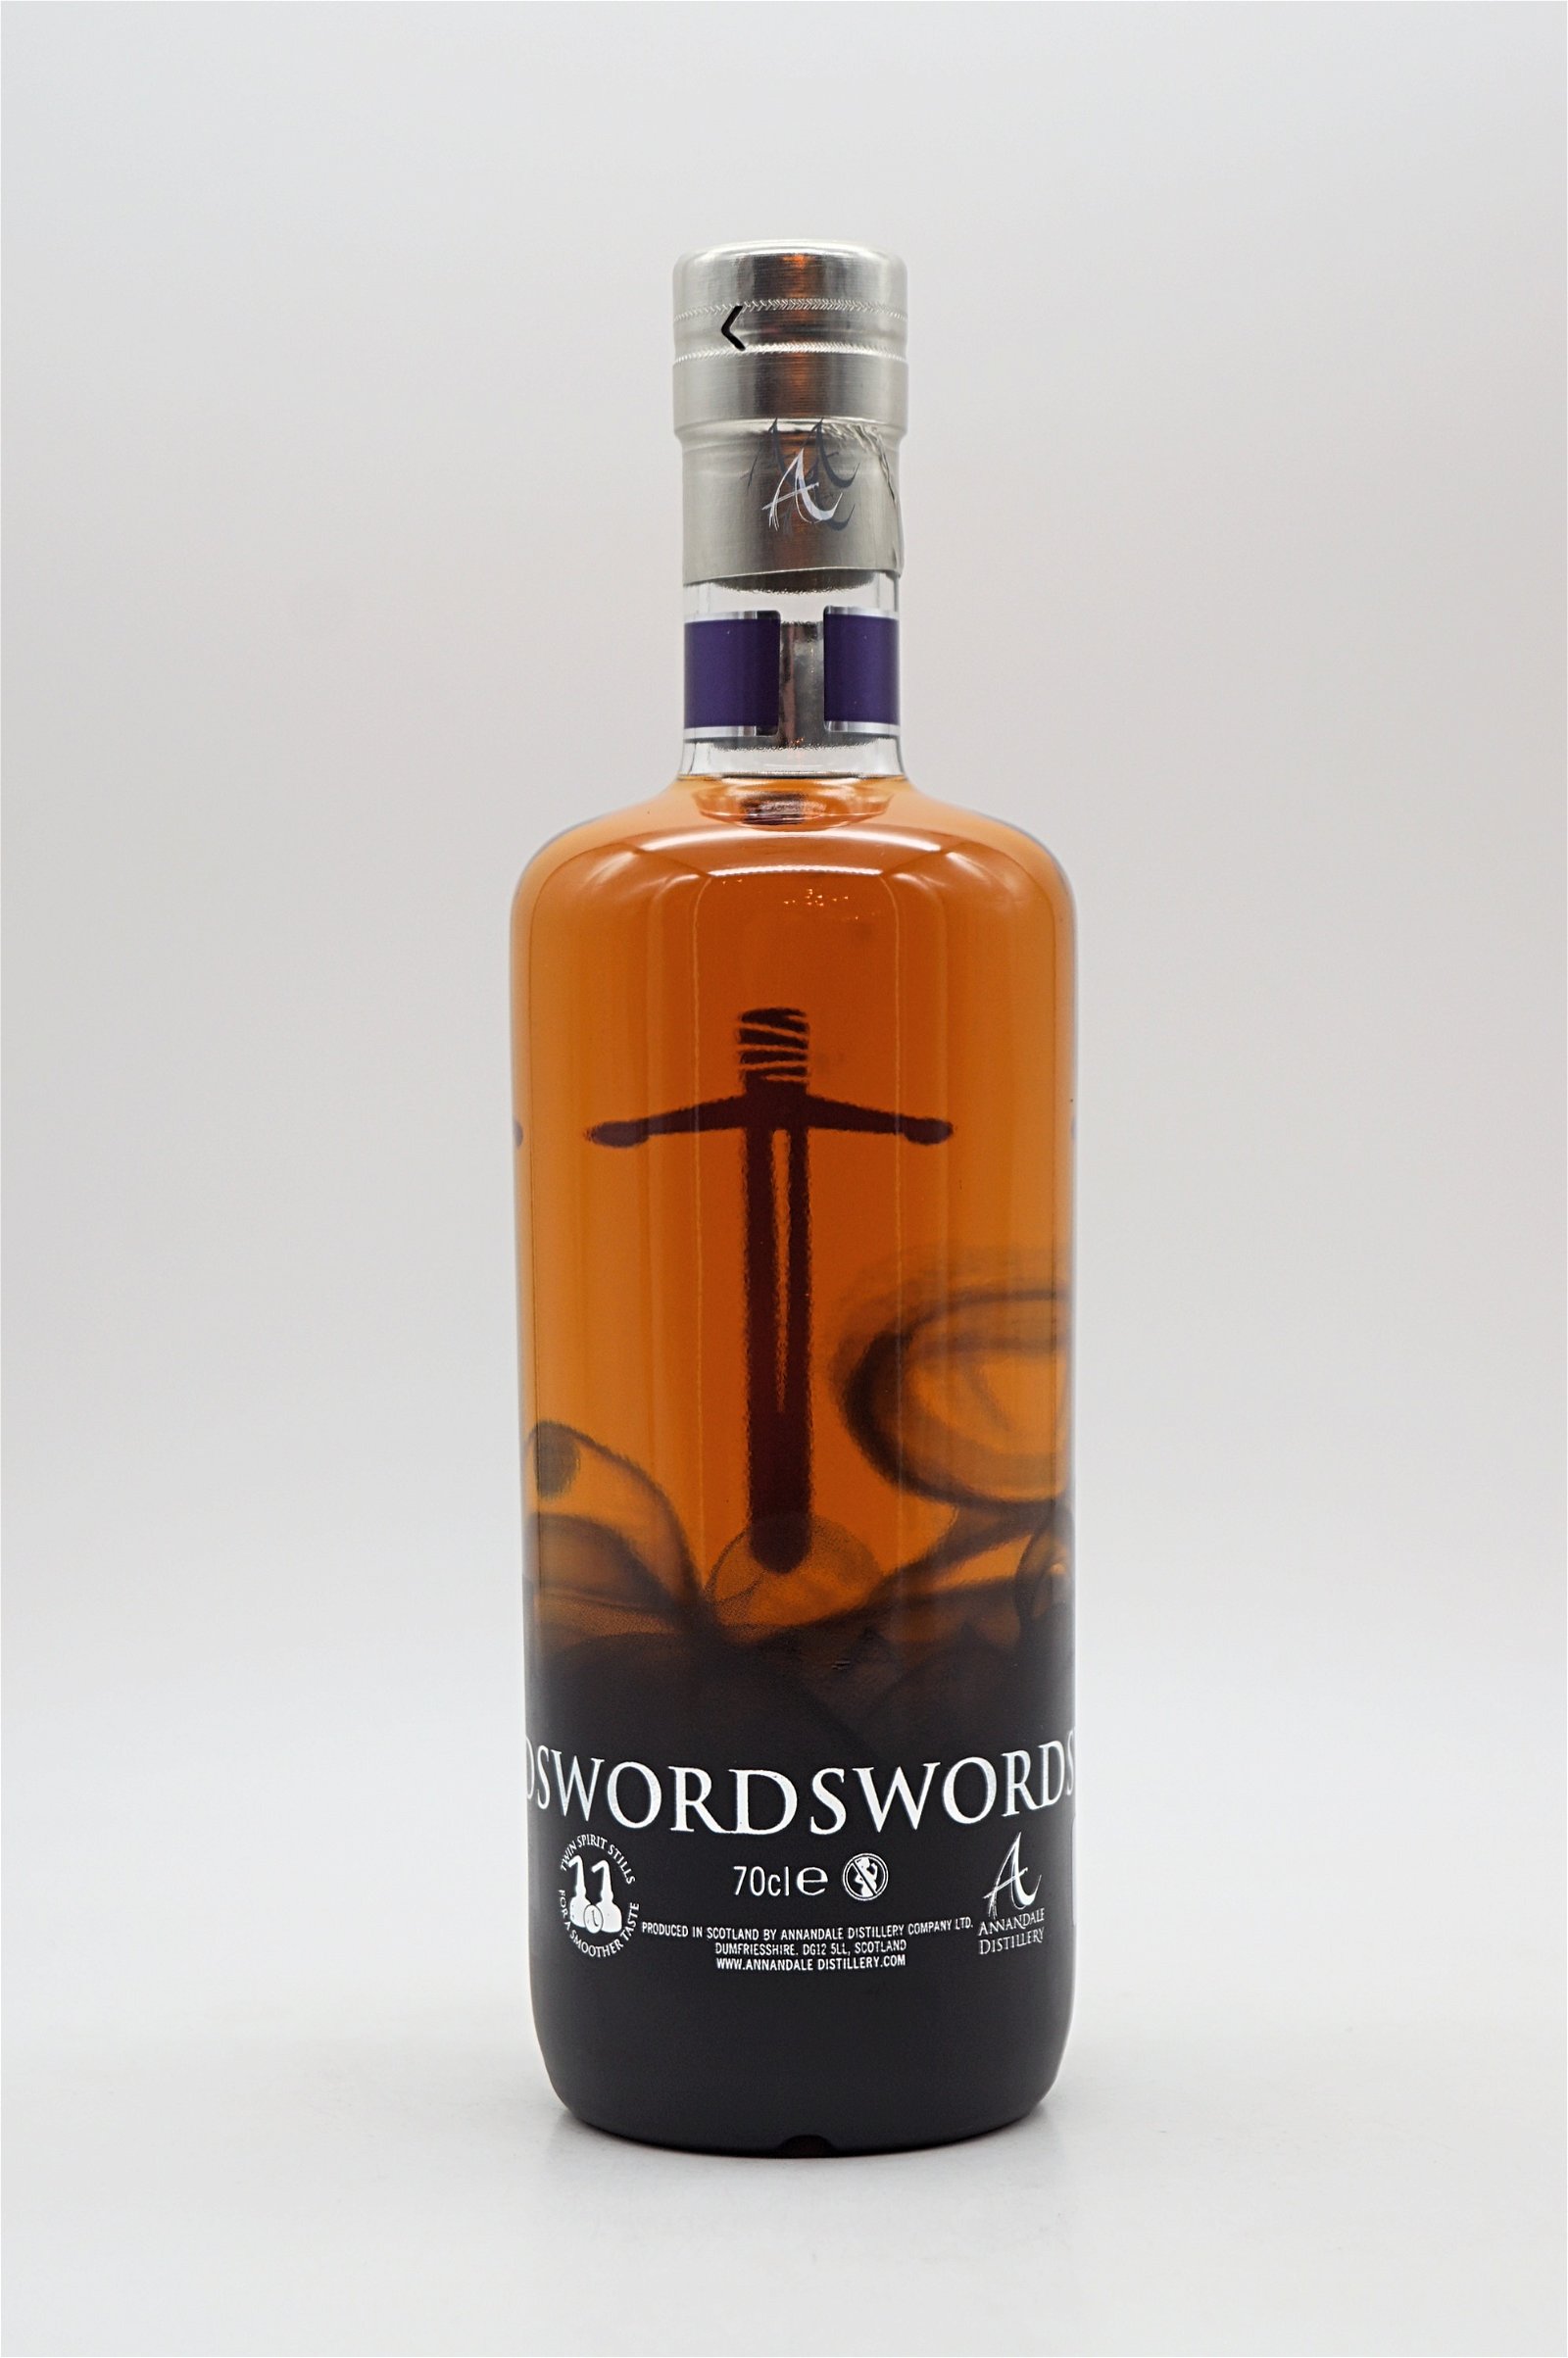 Annandale Man O Swordsword Founders Selection Single Red Wine Cask No. 357